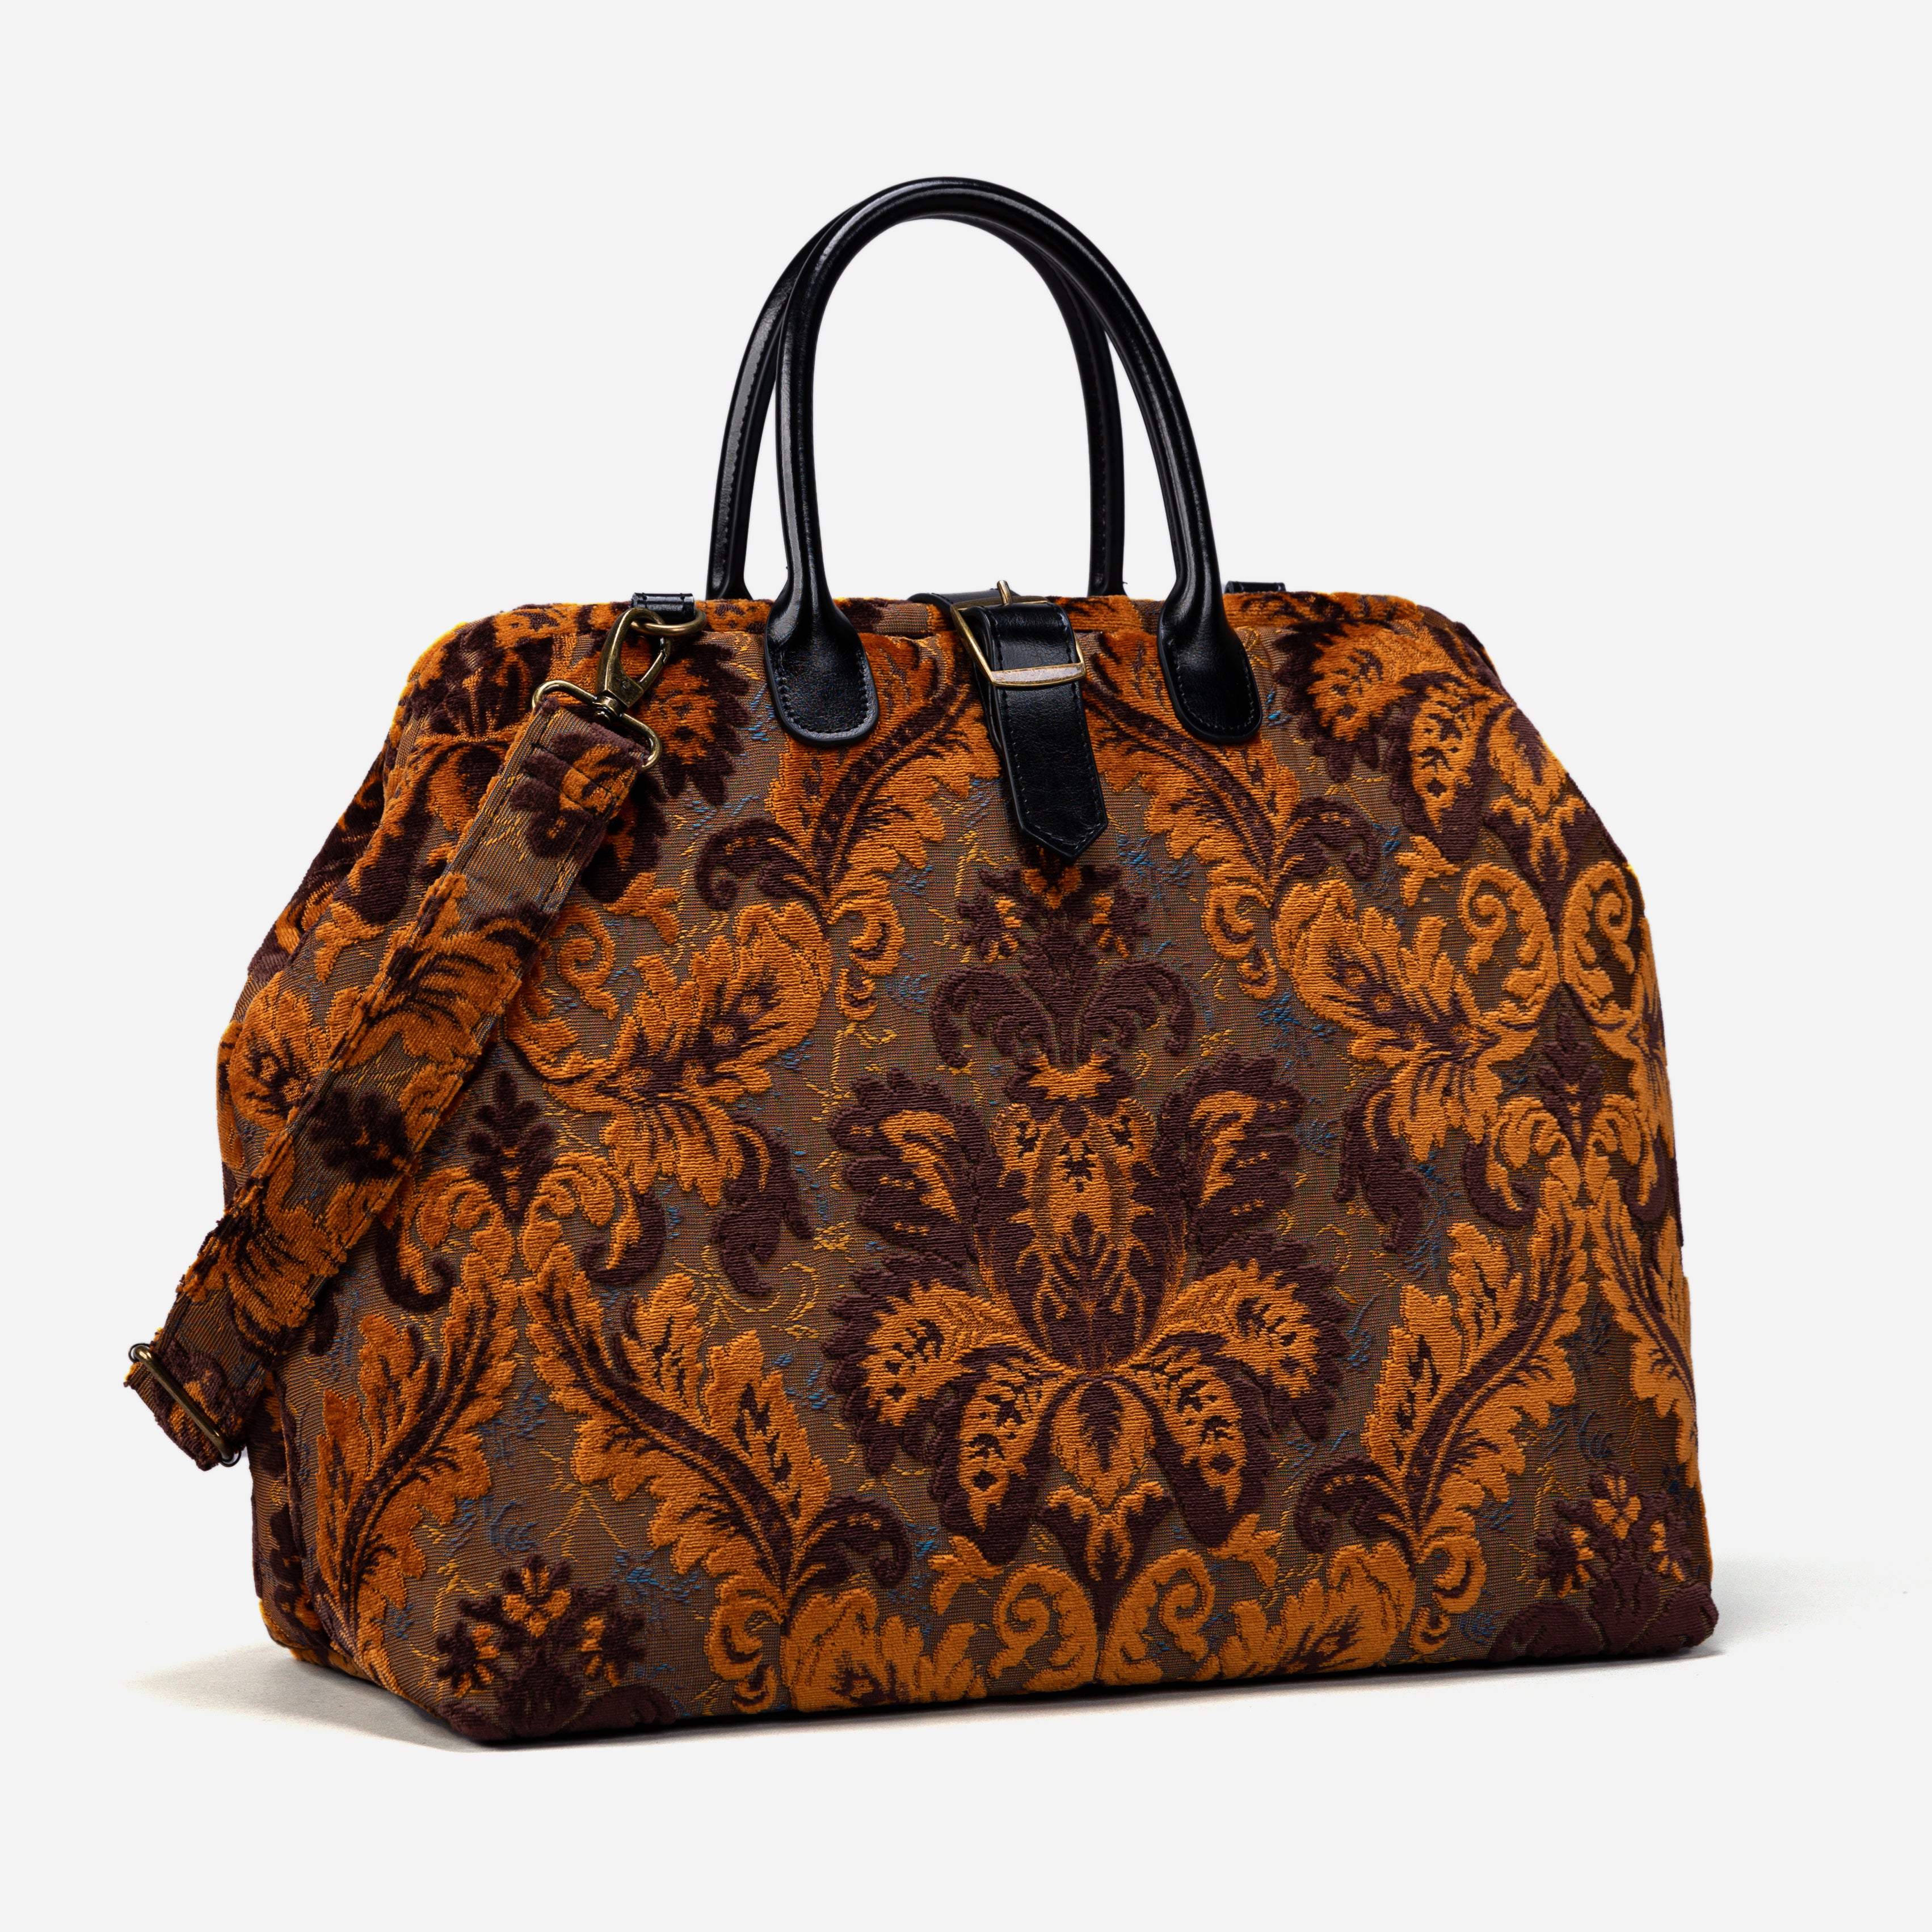 Mary Poppins Carpetbag Revival sienna weekender overview